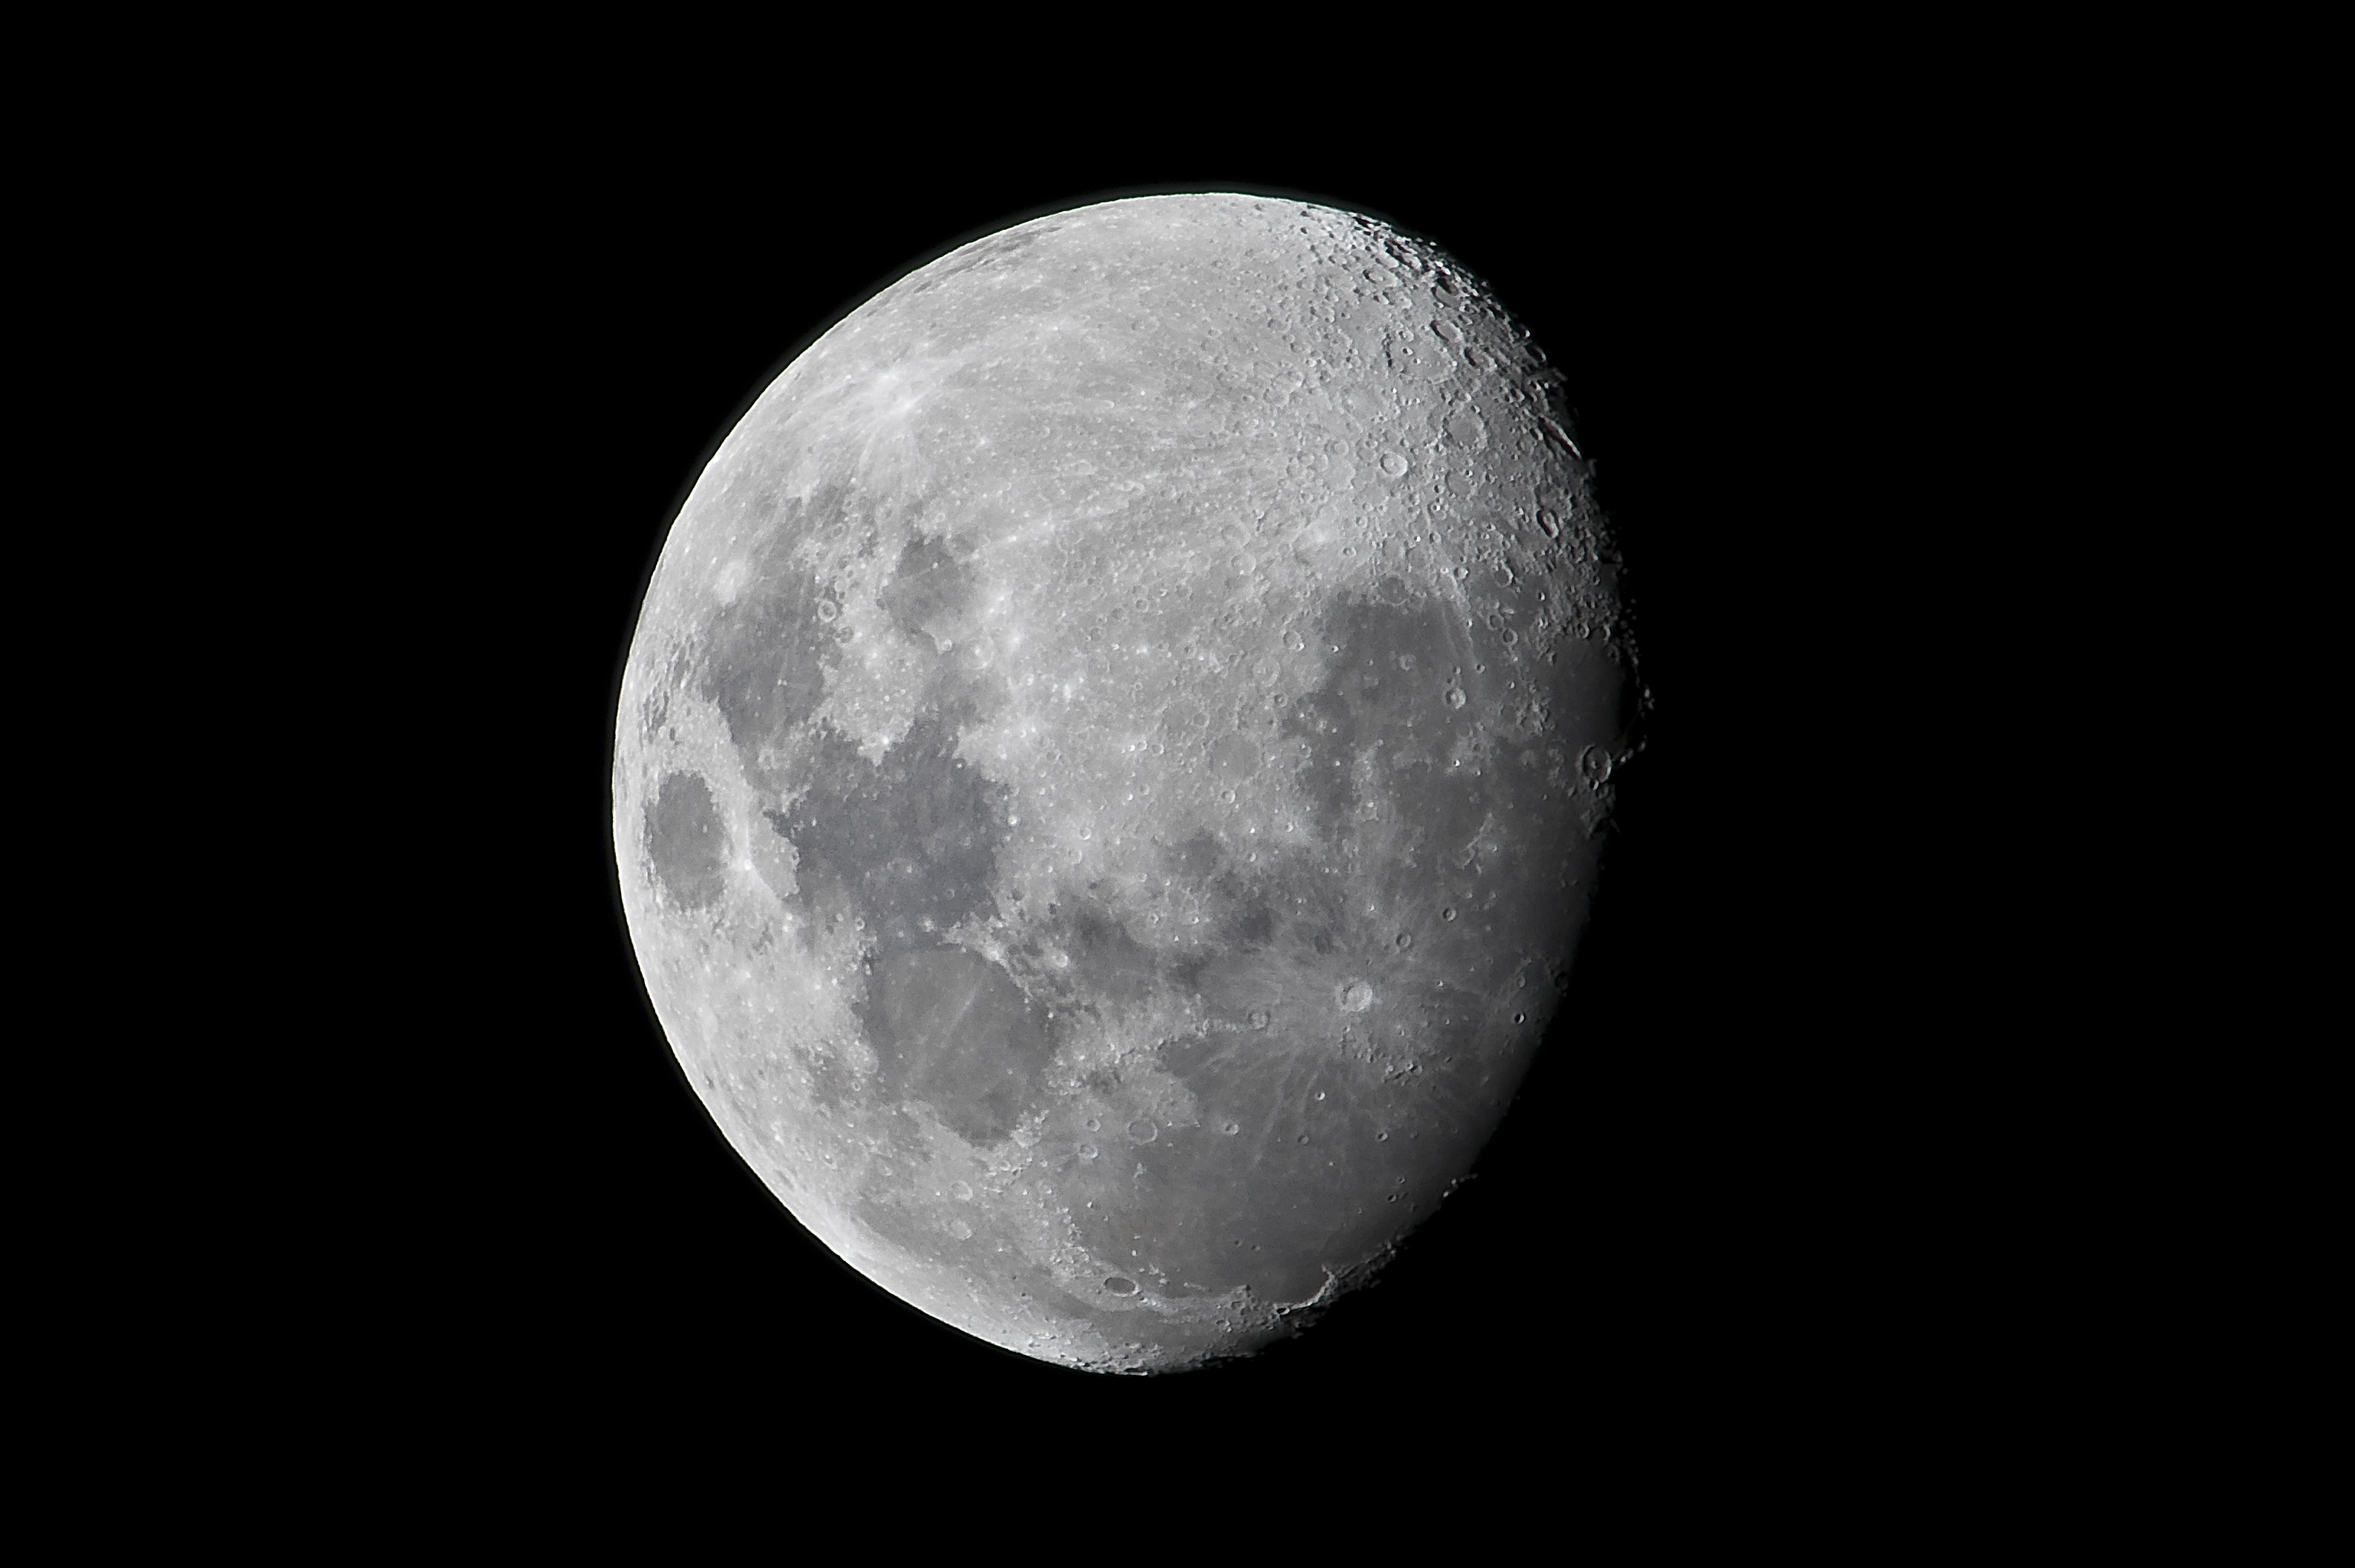 Lune d. Голубая Луна. Луна 16. Gibbous Moon. Be over the Moon.